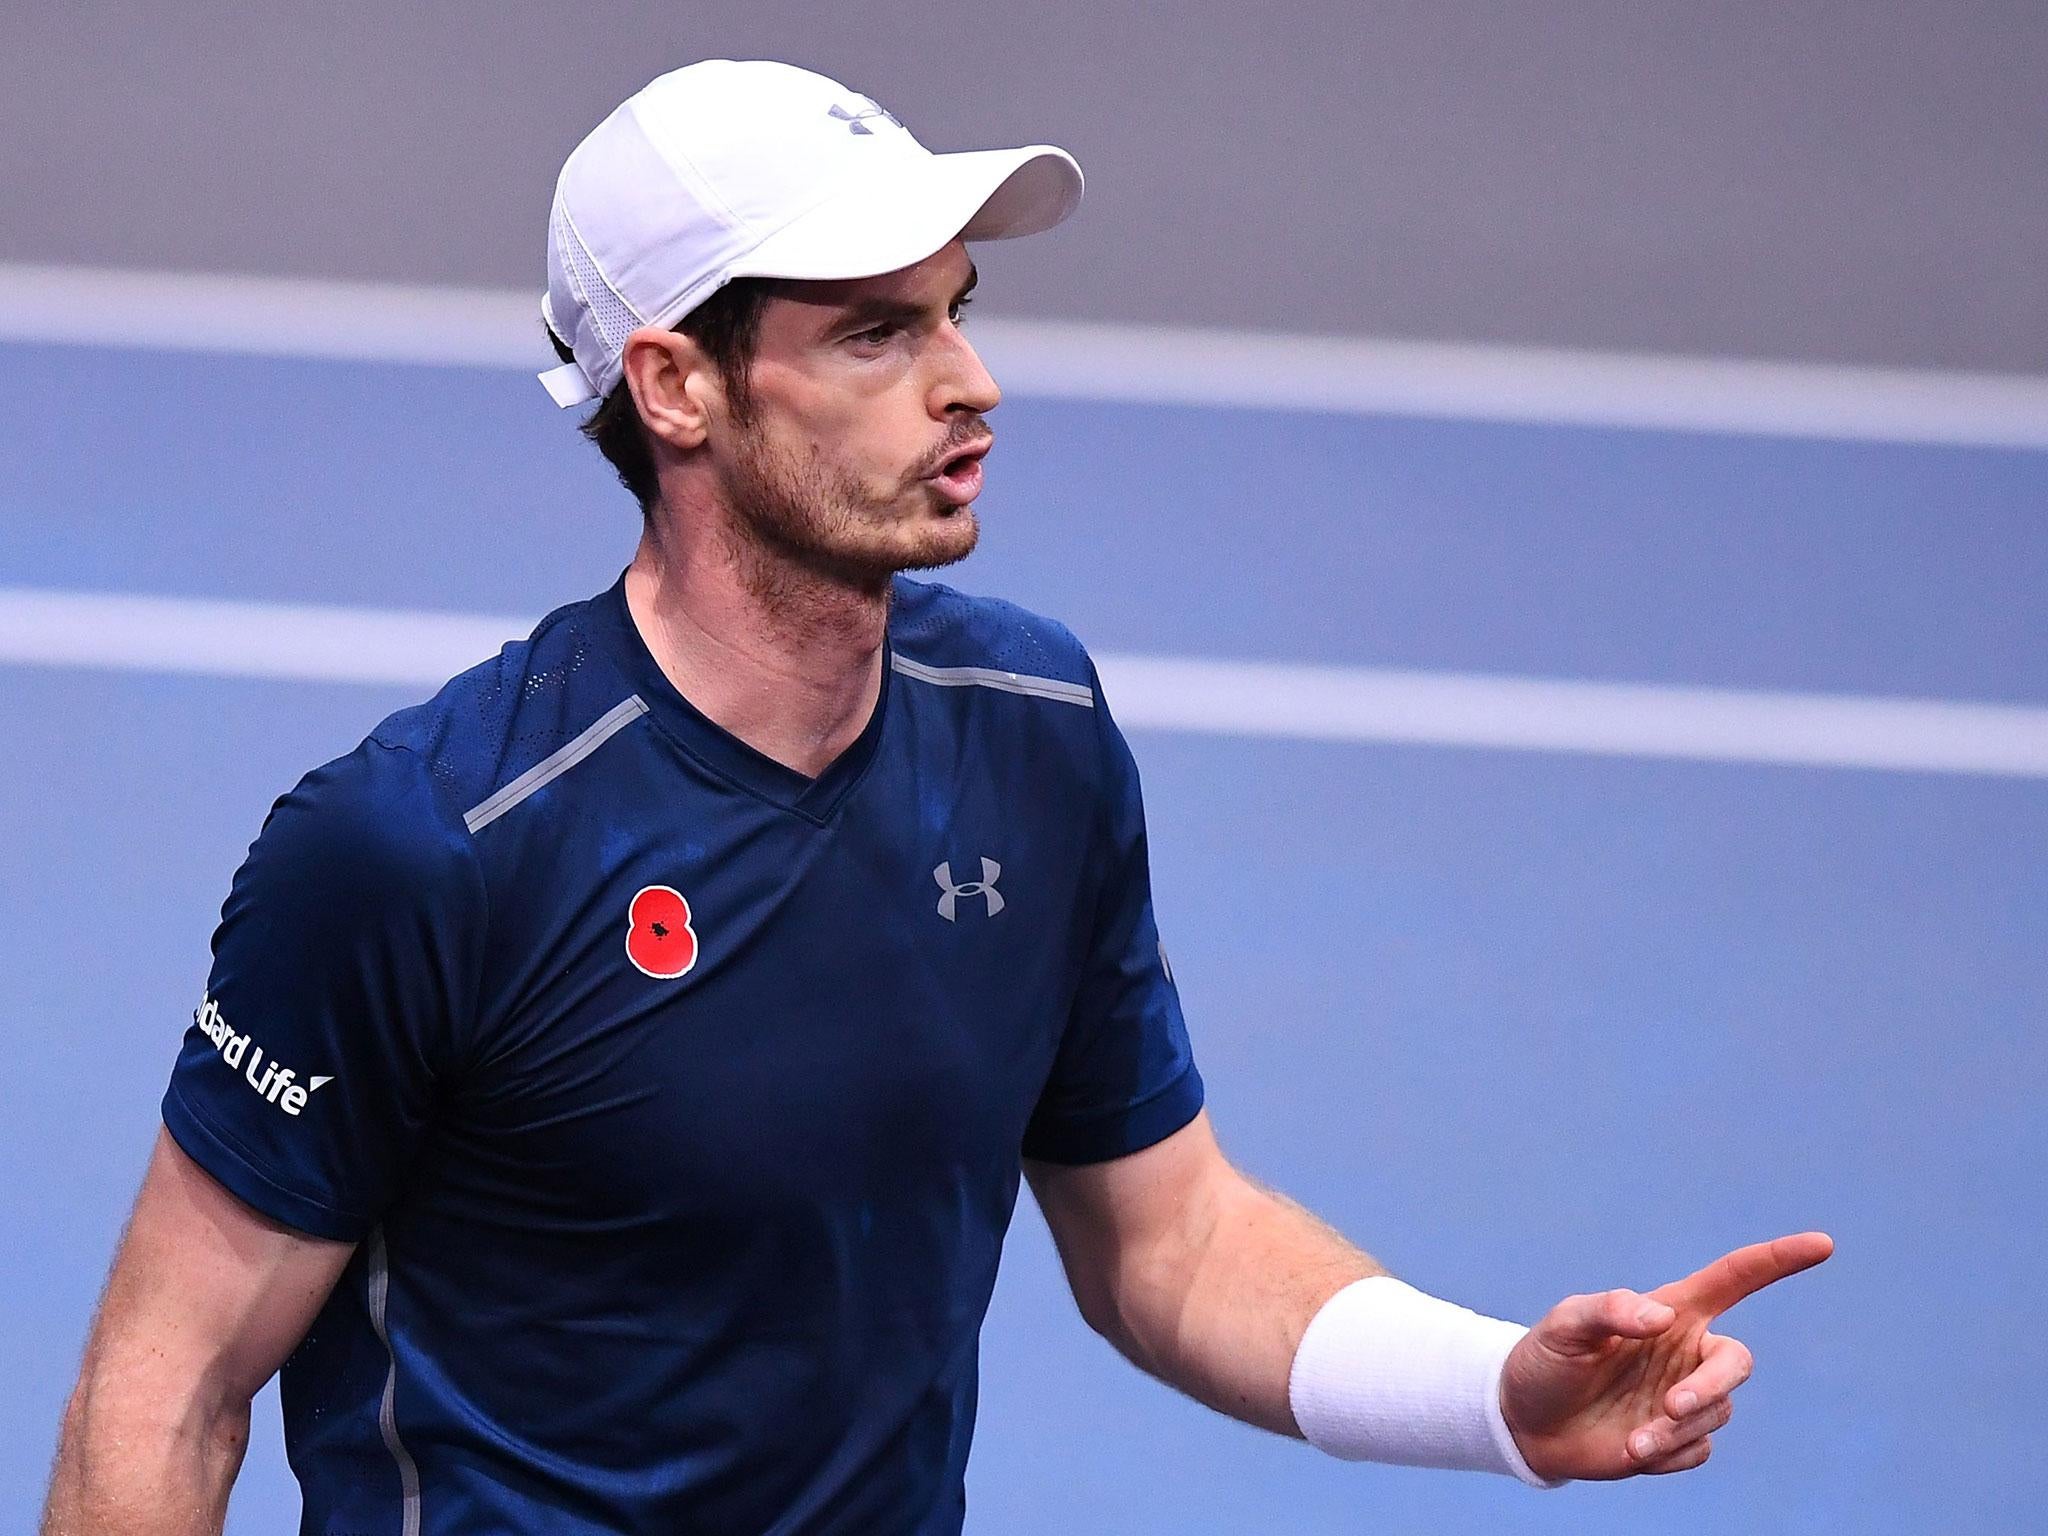 Murray took 73 minutes to beat his French opponent